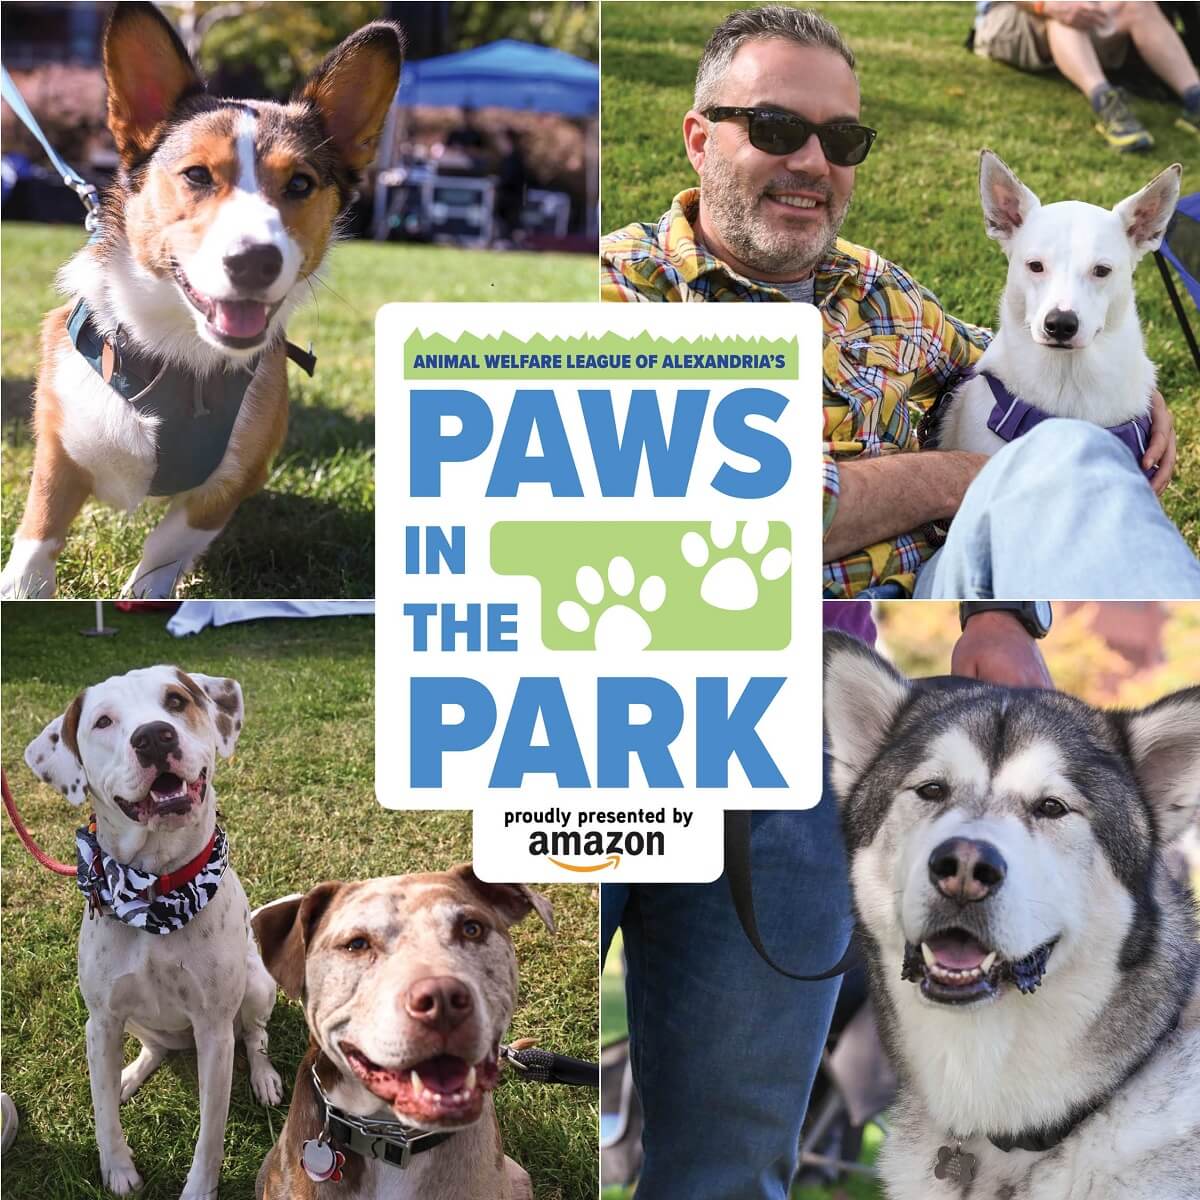 Paws in the Park event featured image of various dogs and a smiling pet parent